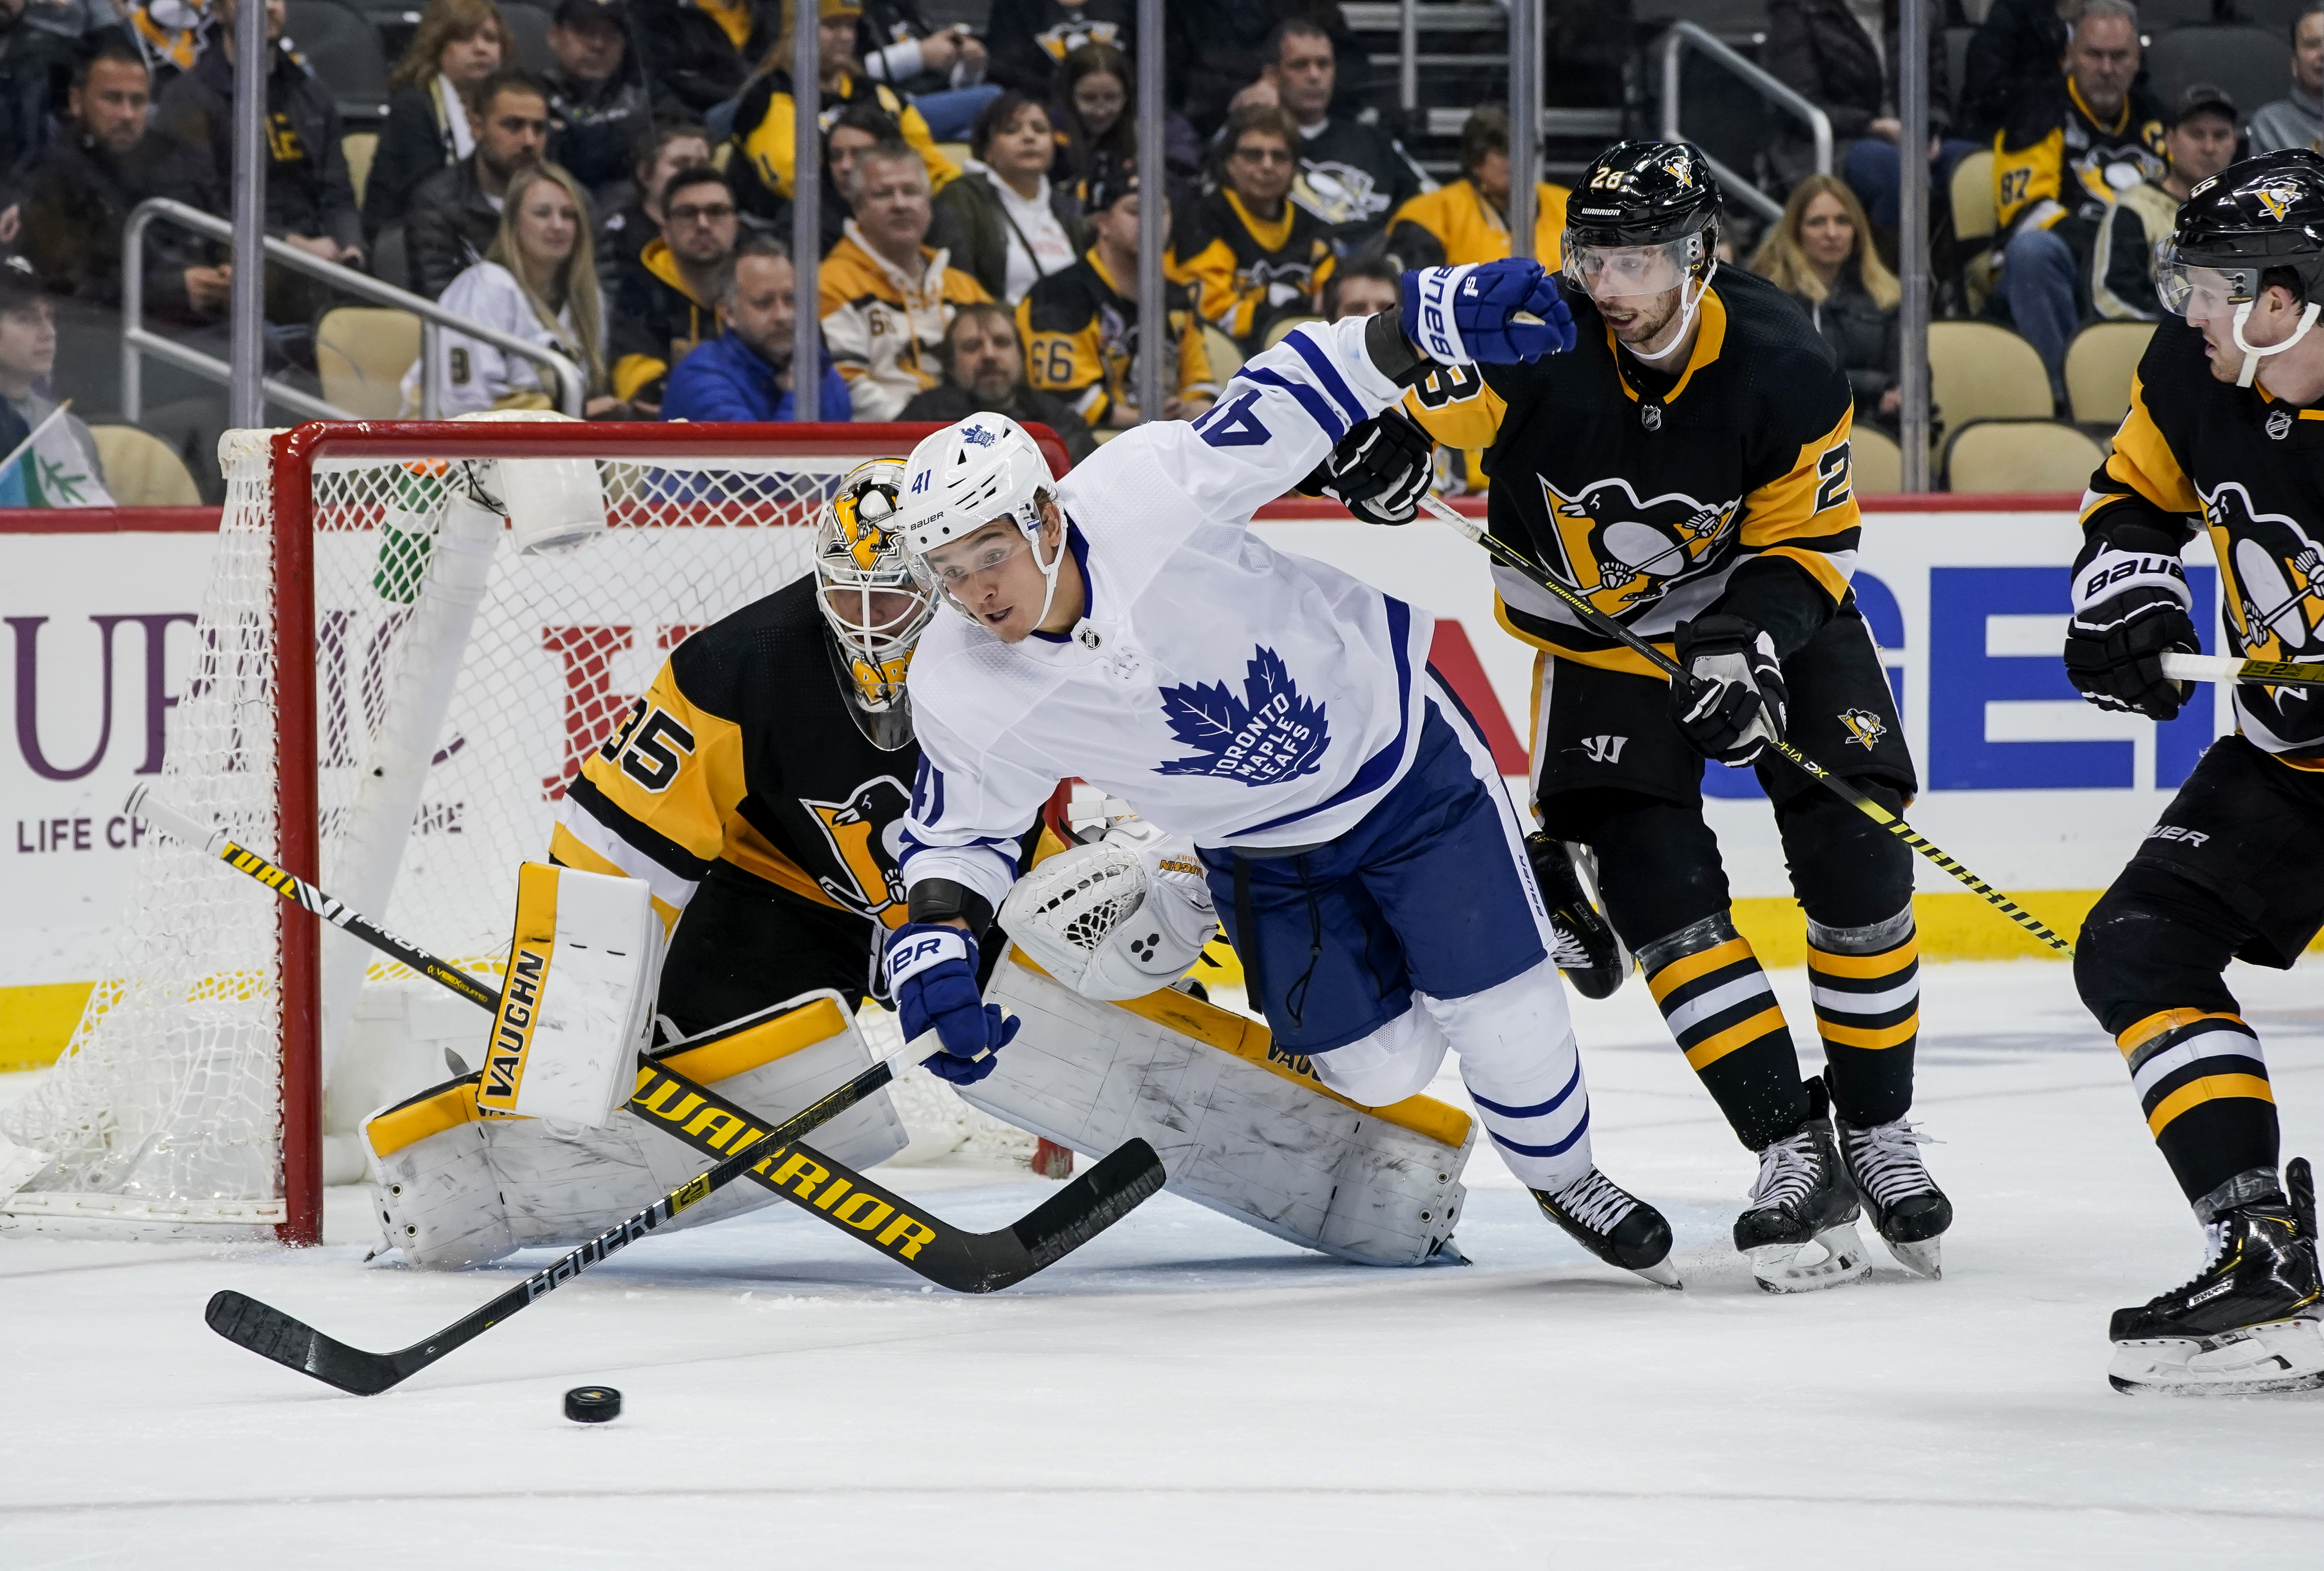 NHL: FEB 18 Maple Leafs at Penguins